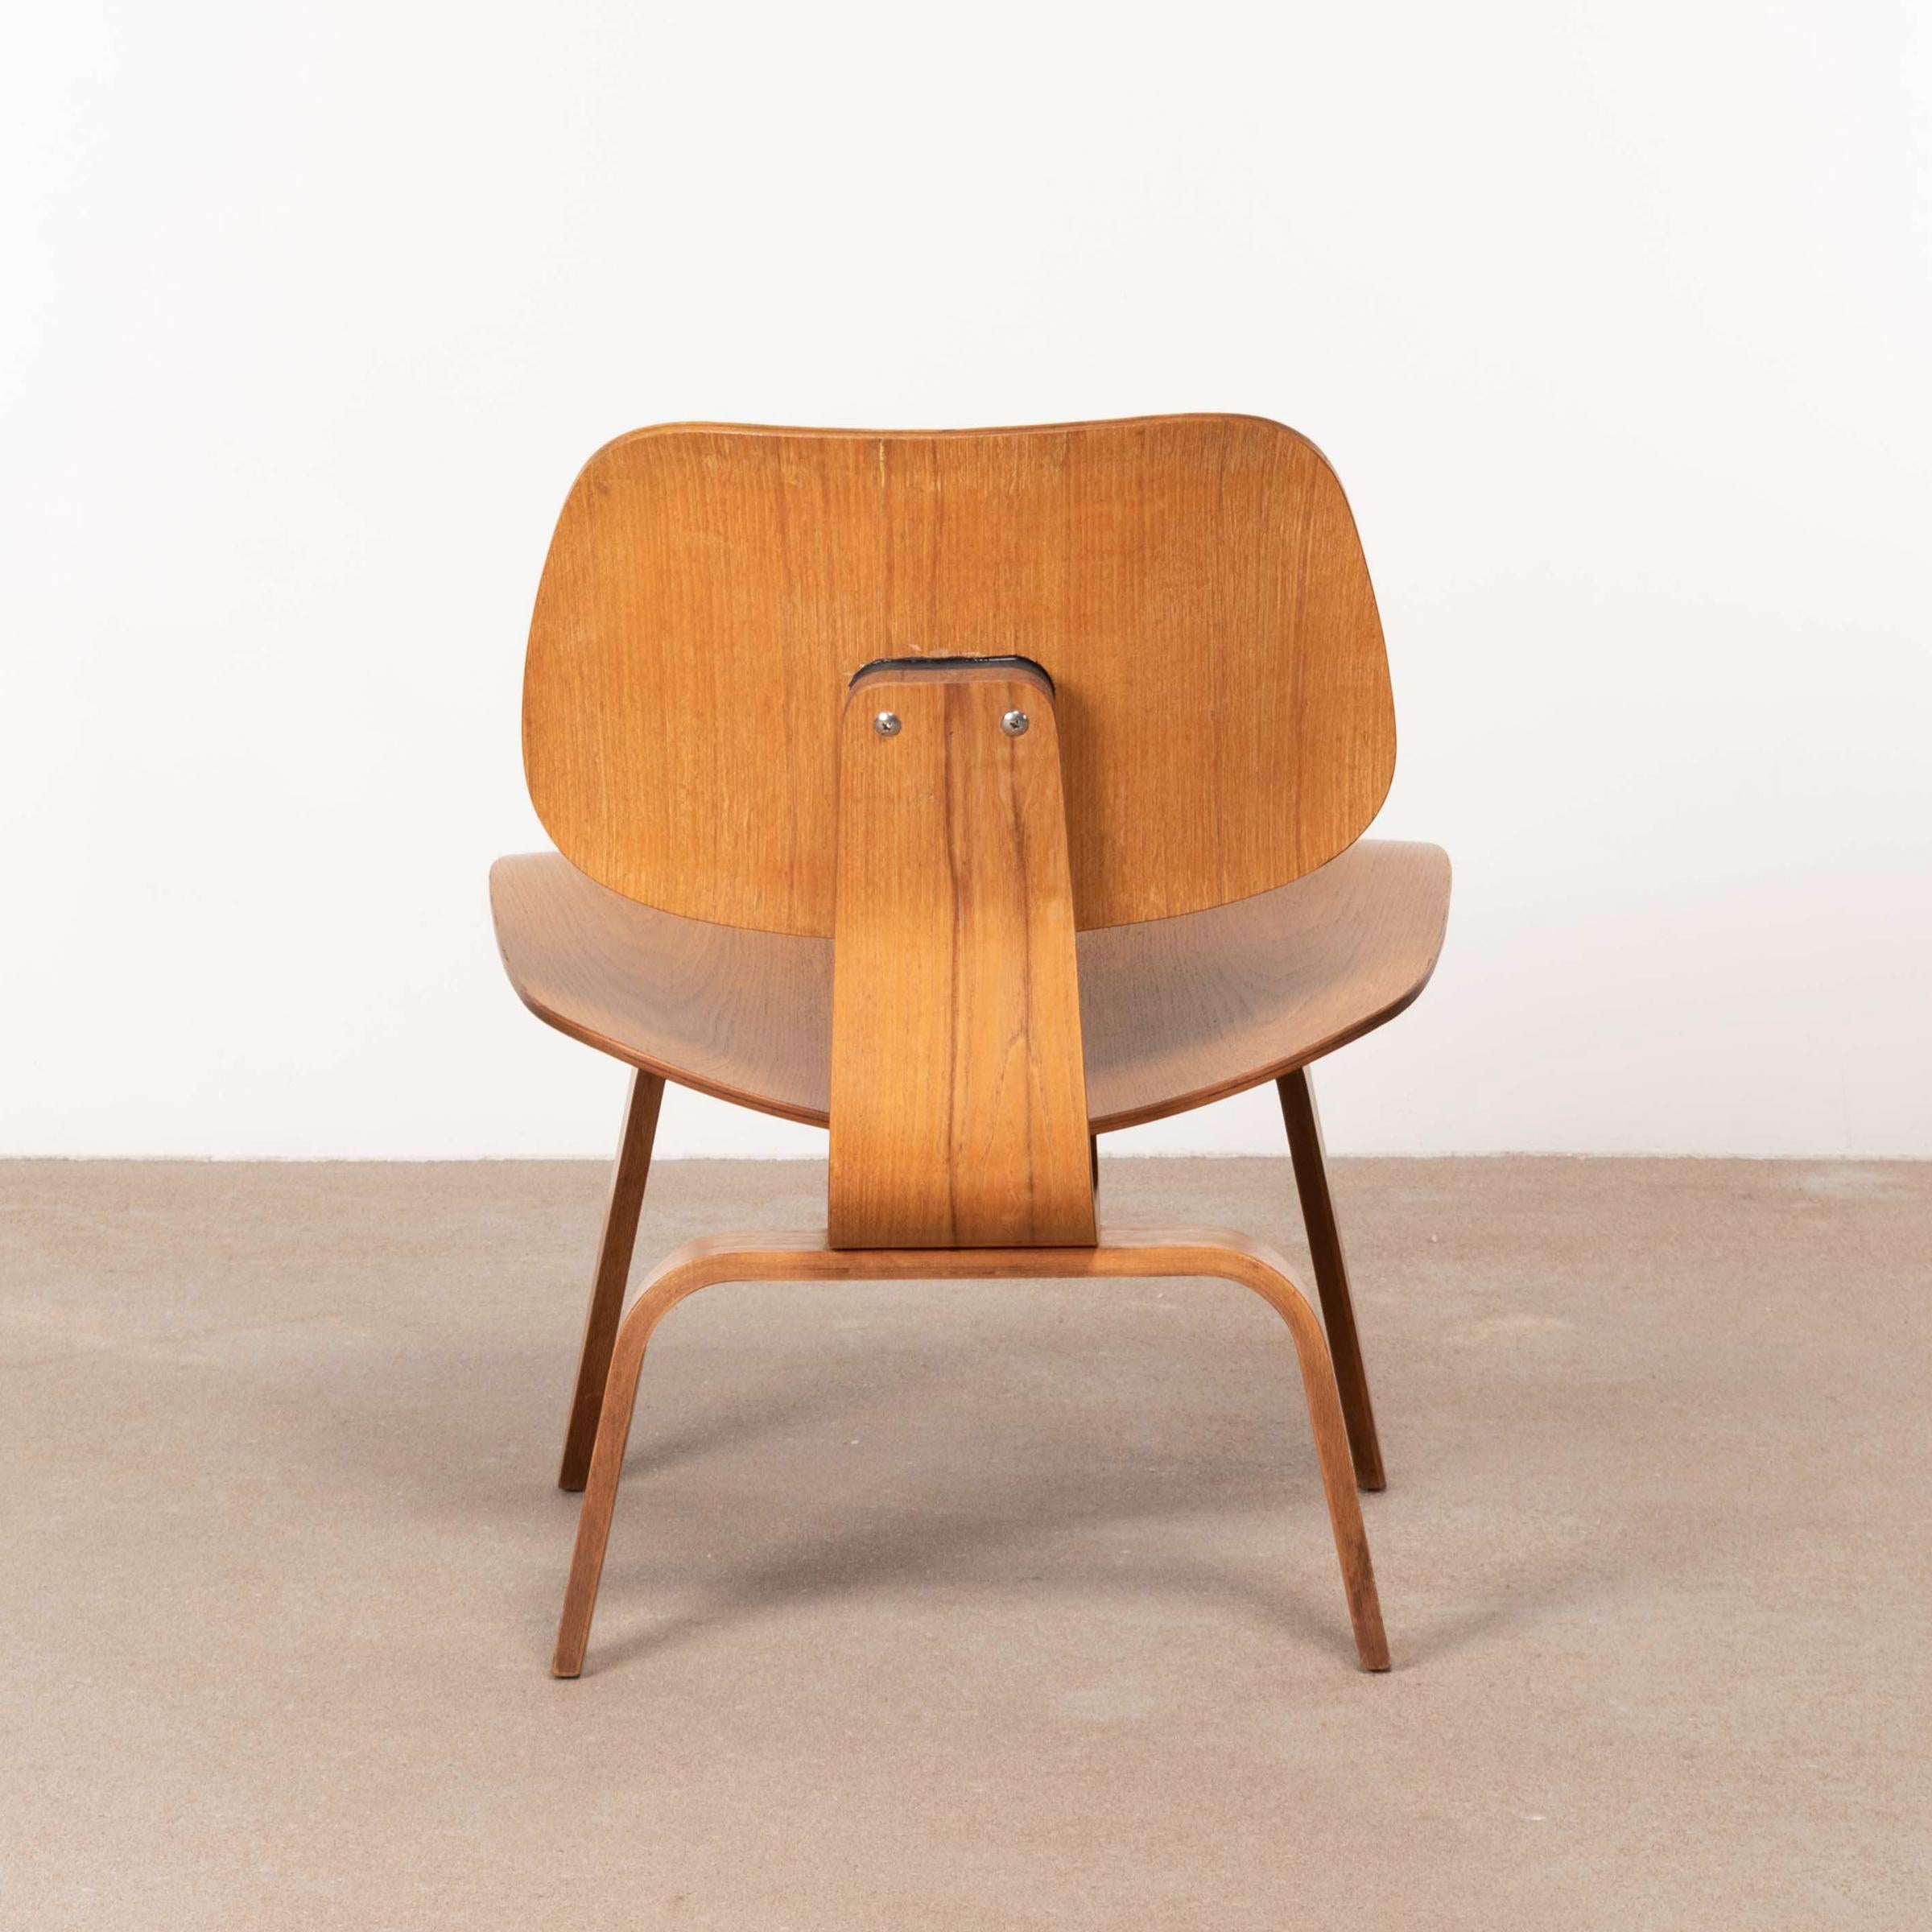 American Charles & Ray Eames Early LCW Ash Lounge Chair for Herman Miller, 1951